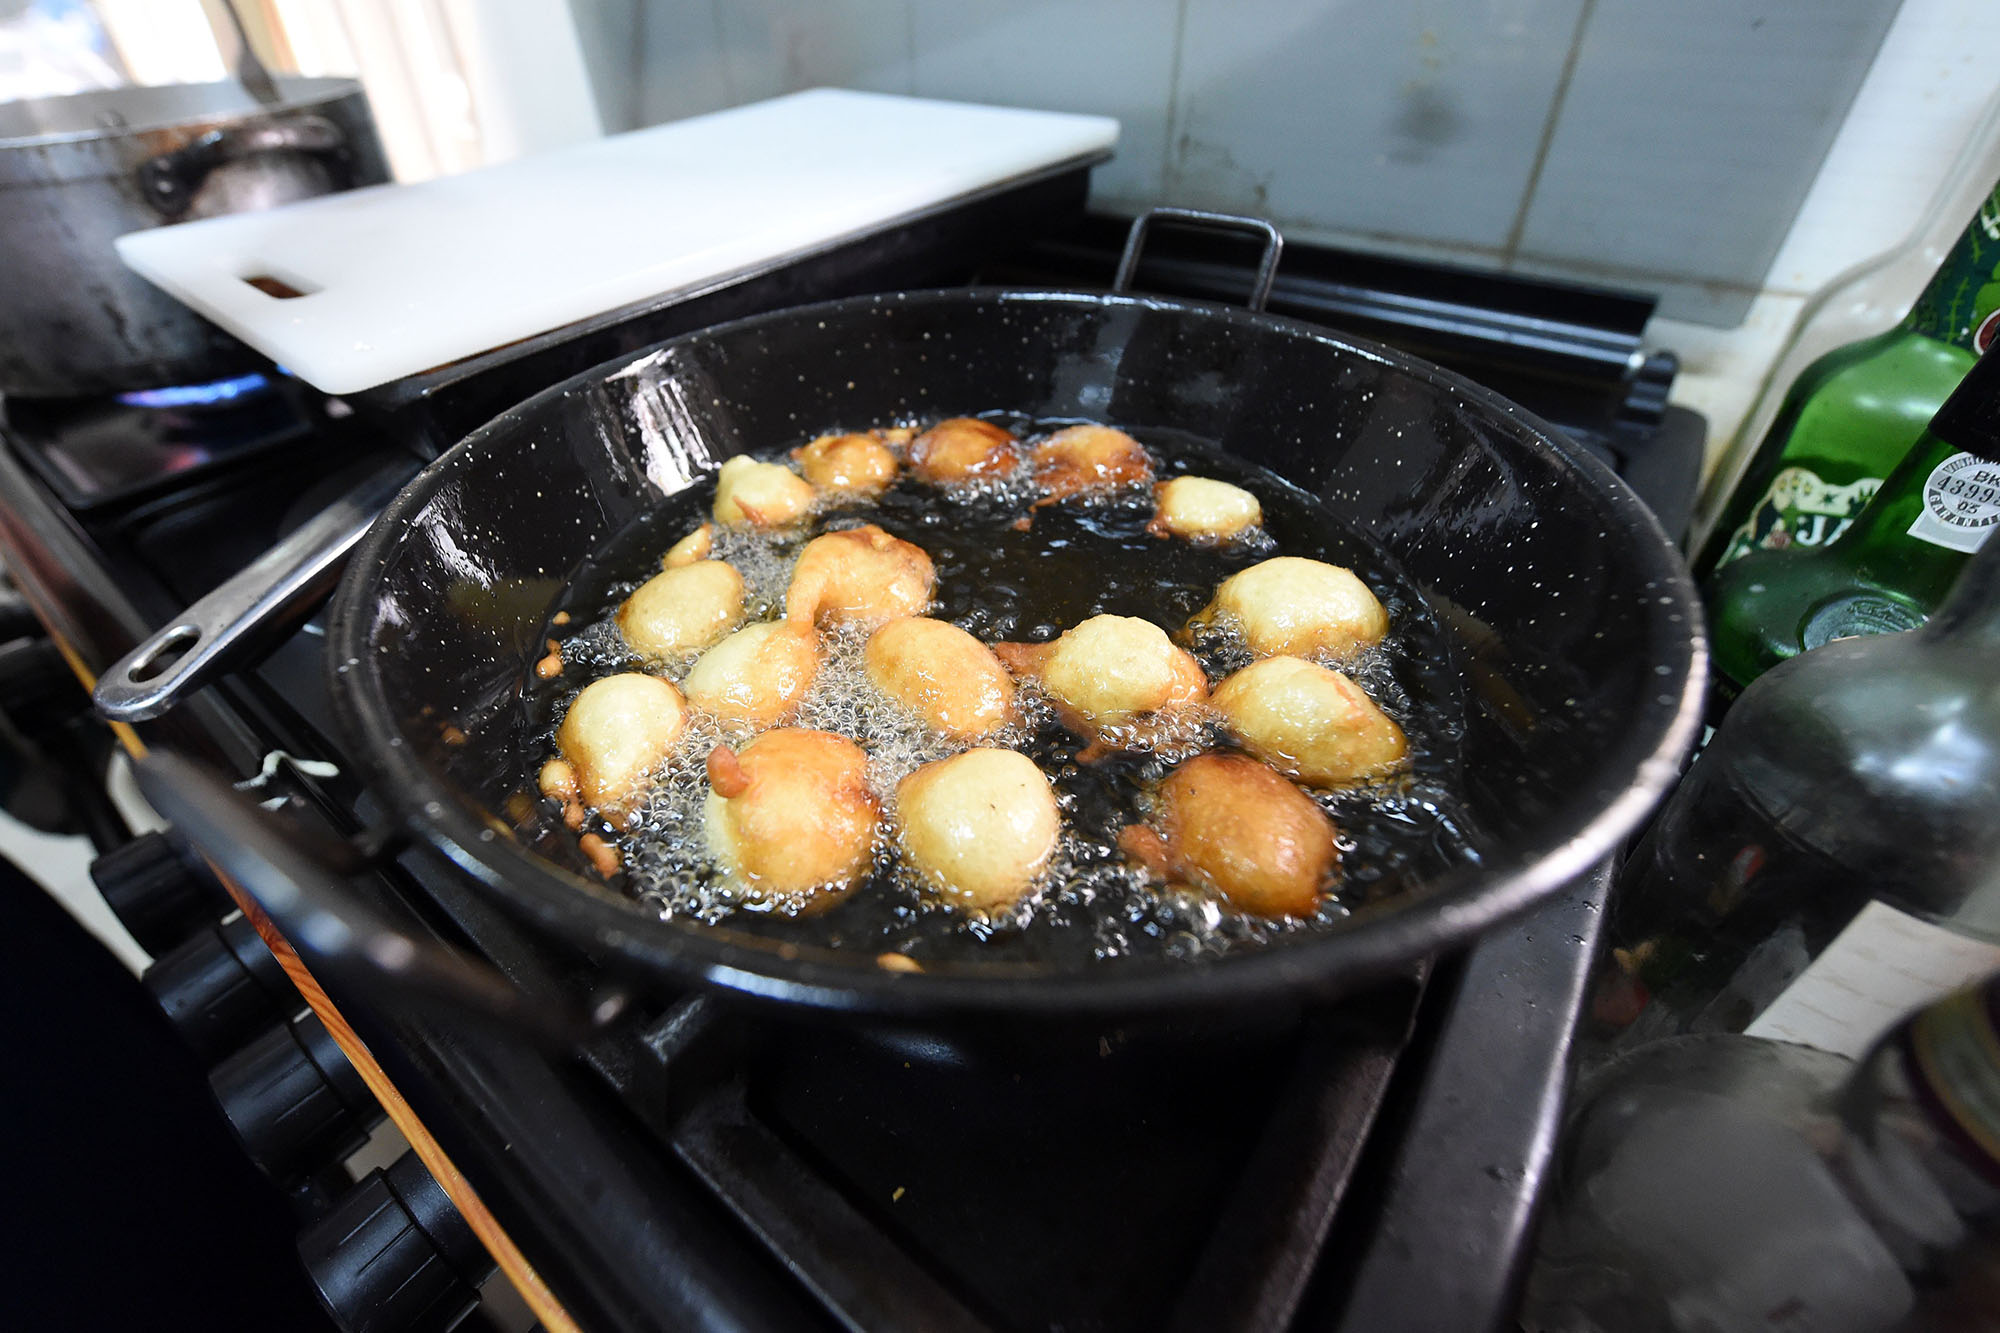 Nigeria Inflation Hits Akara Snack Due to High Beans, Peanut Oil Prices -  Bloomberg